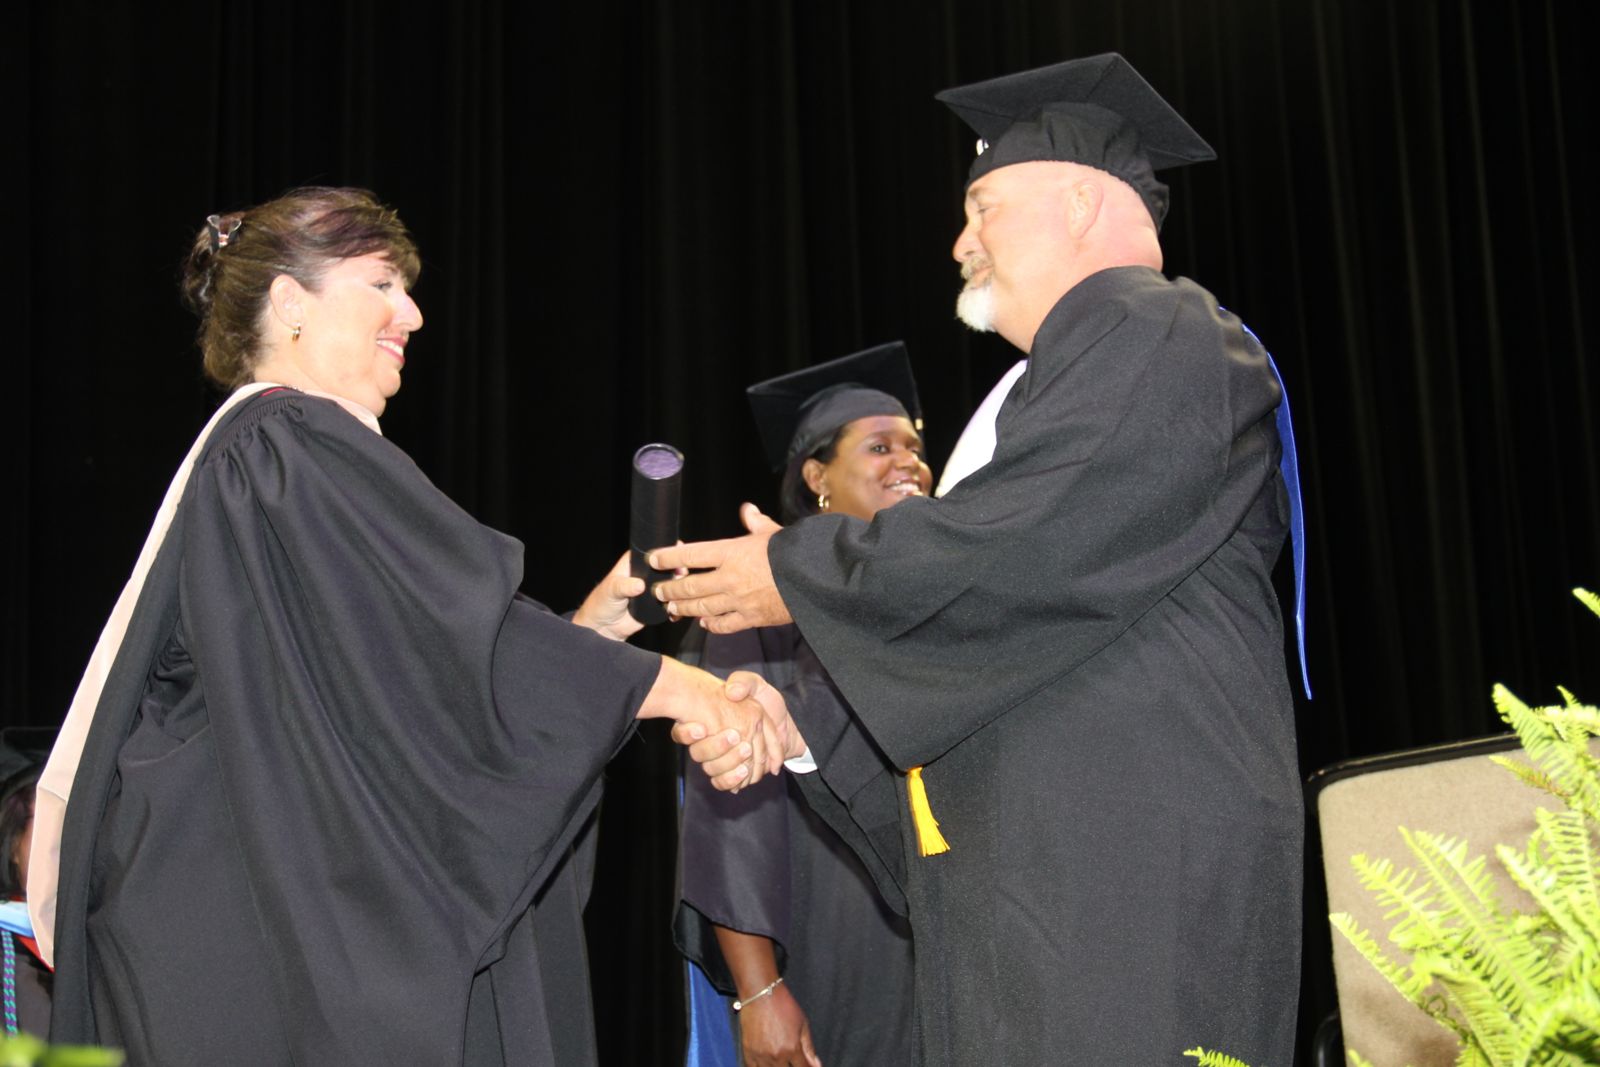 Student and Army Veteran Donald Thrasher accepts his degree from President Hoover